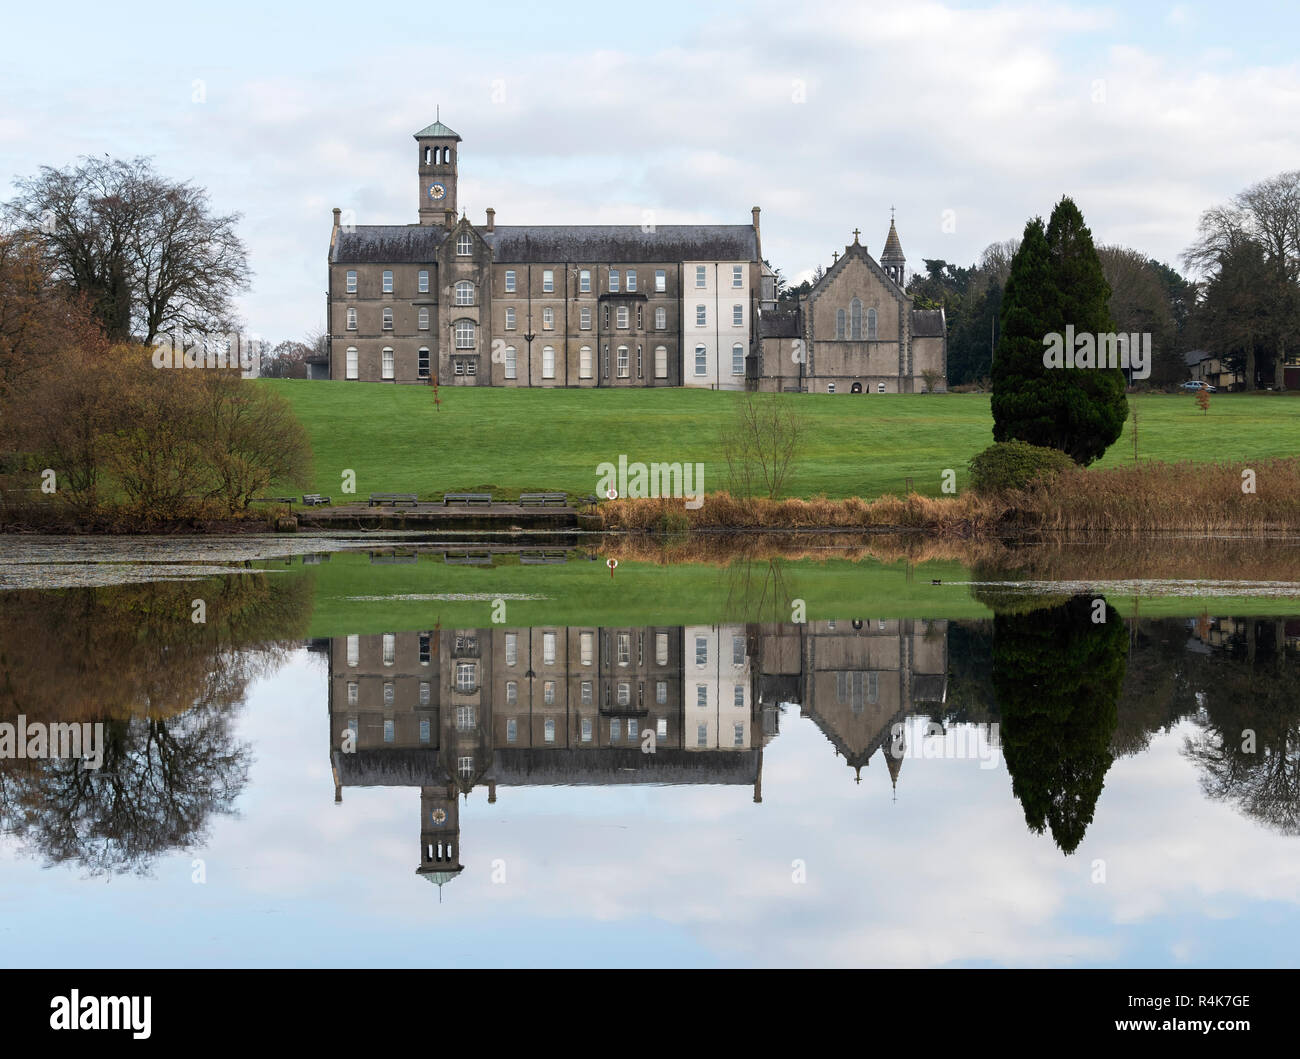 Rockwell College with reflection in lake, Cashel, Co Tipperary, Ireland Stock Photo